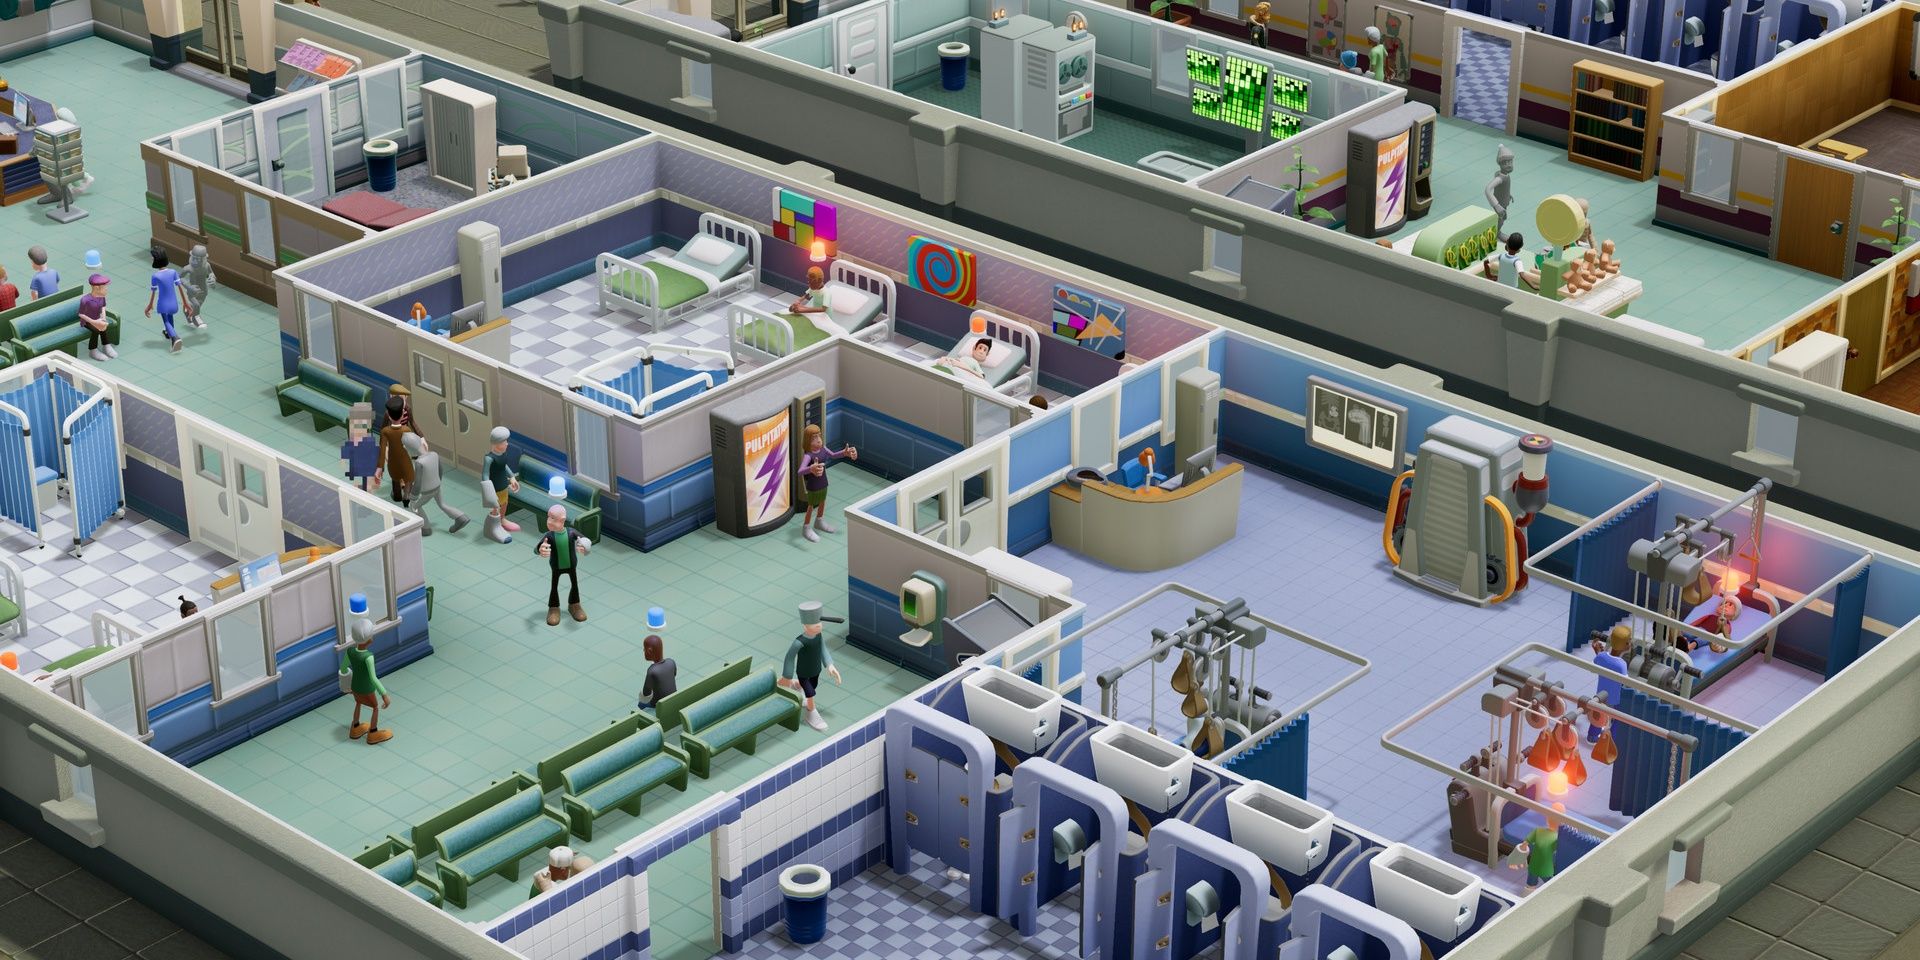 The hospital layout of Two Point Hospital